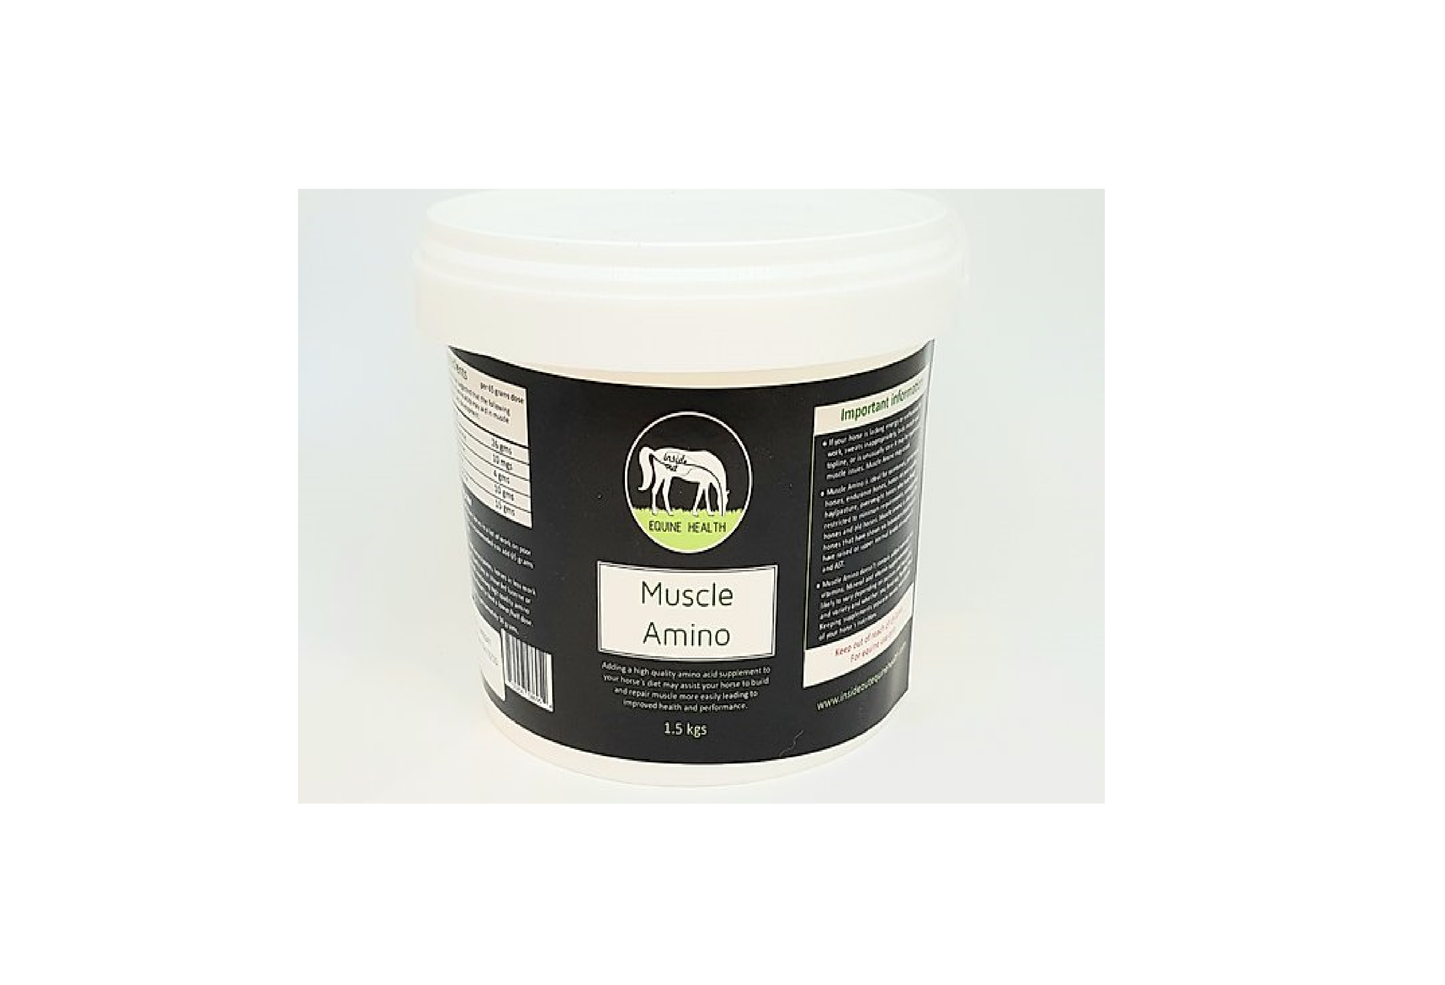 Inside Out Equine Health Muscle Amino